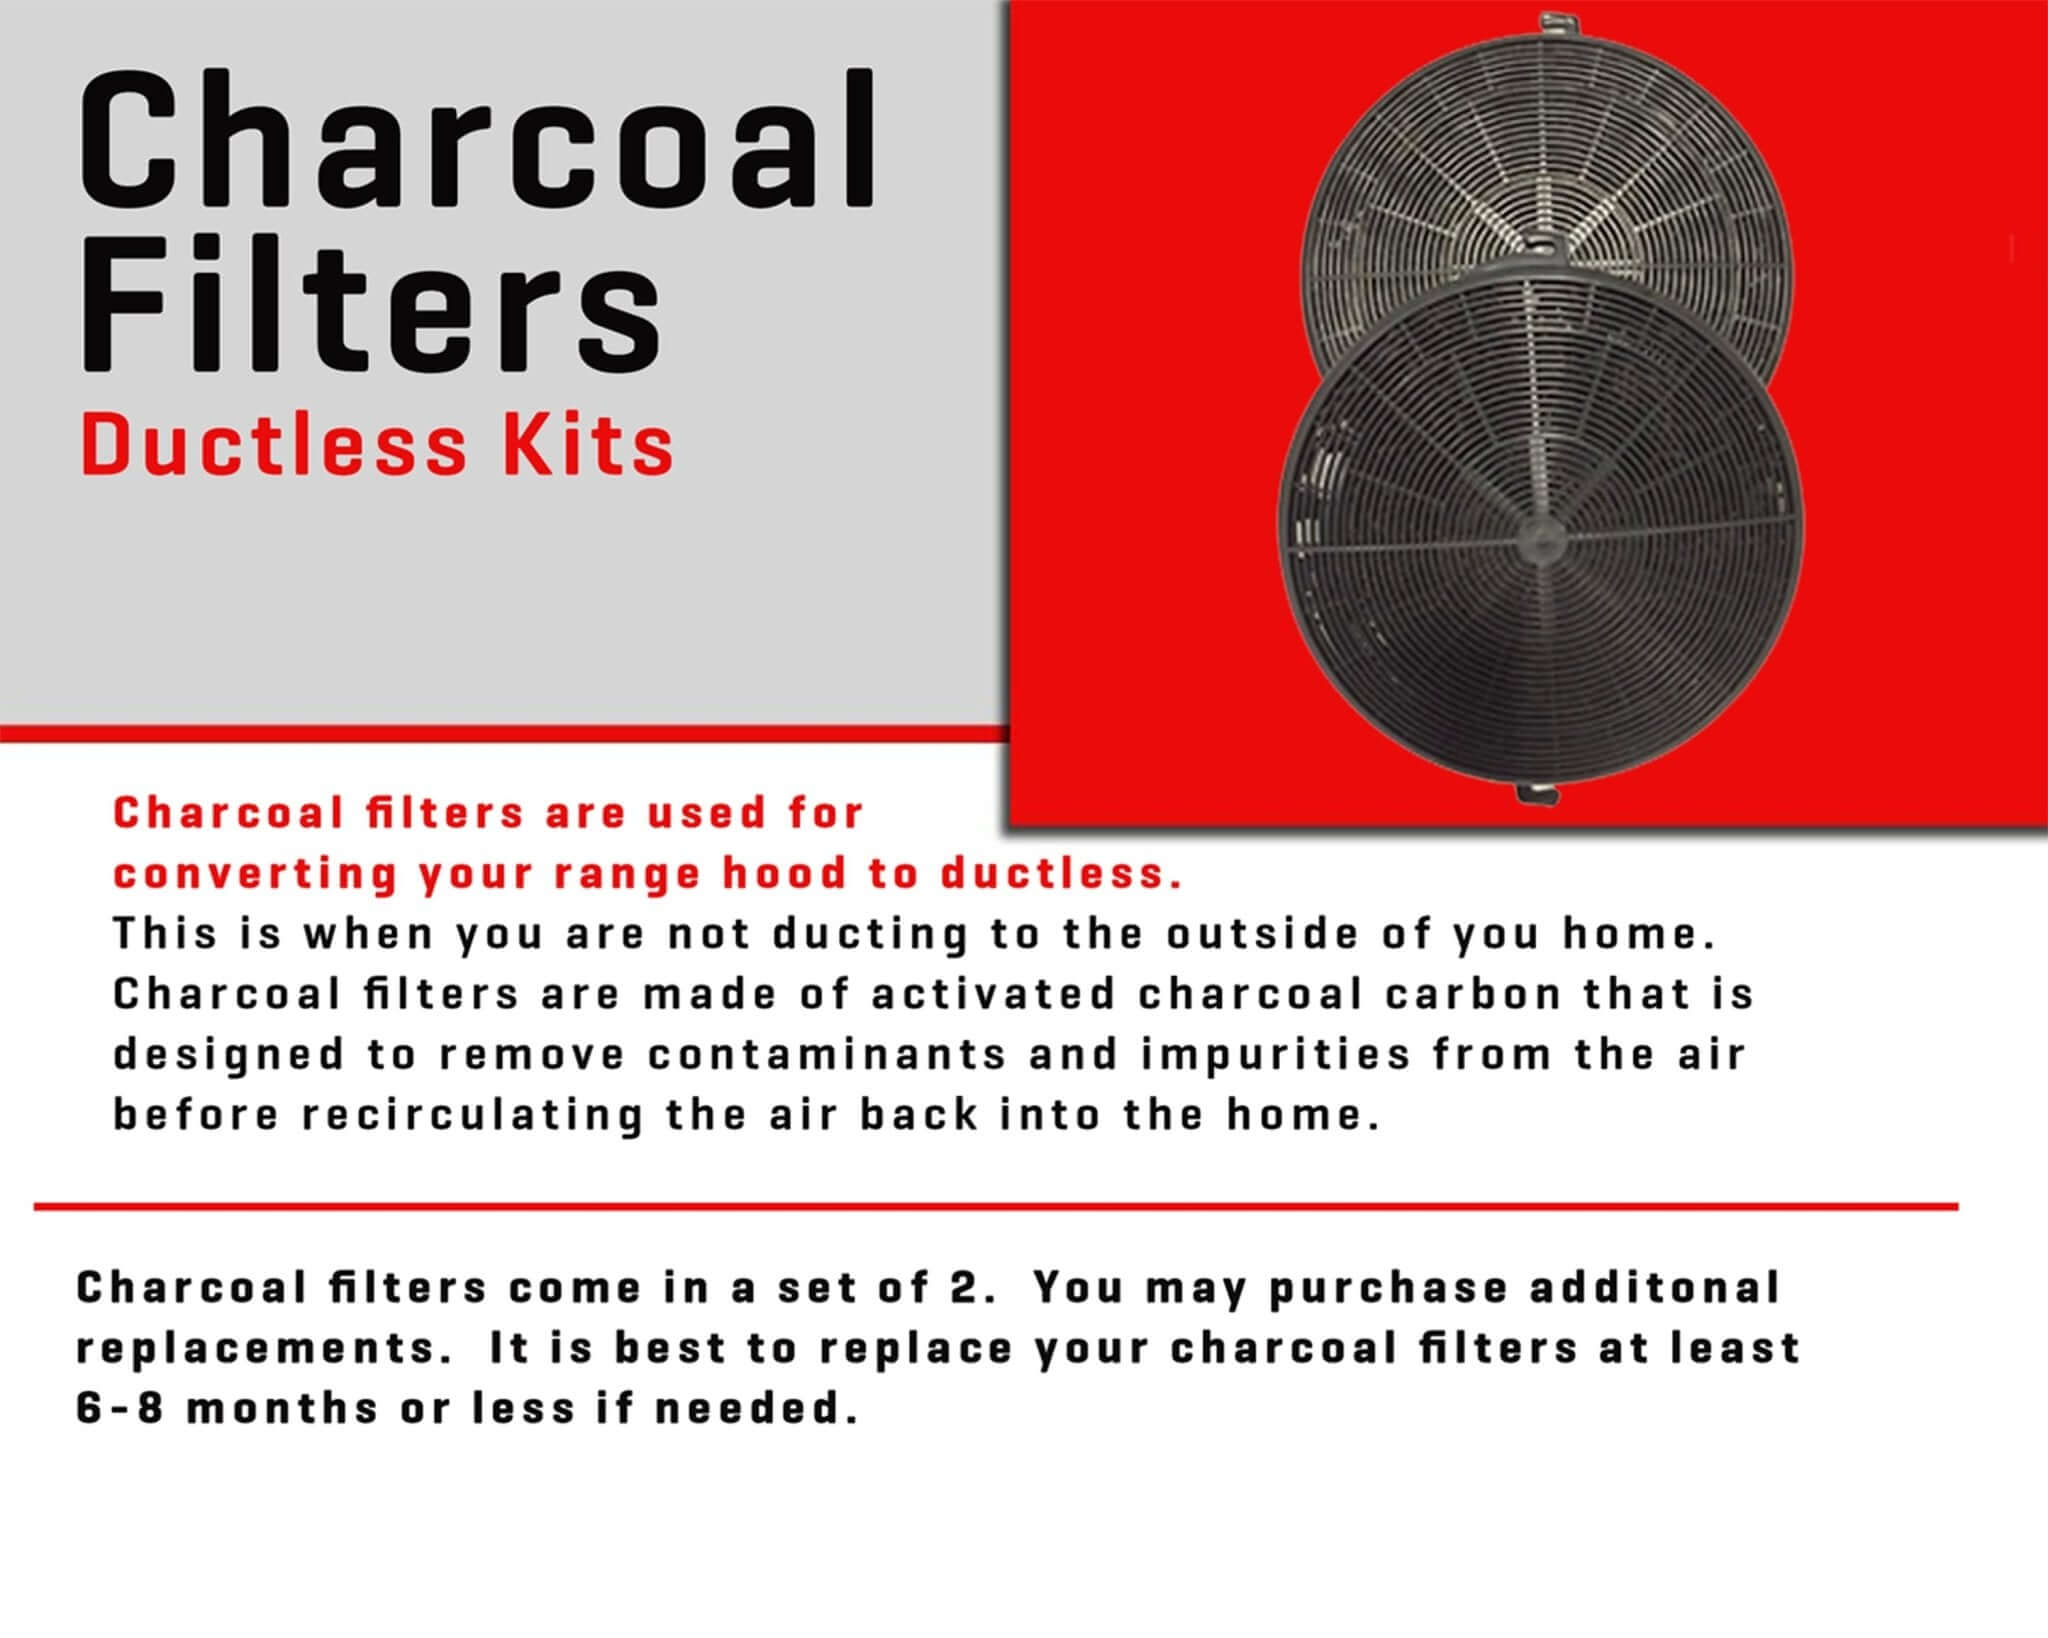 Charcoal Filters for Ductless Kits. Used for converting your range hood to dutless.